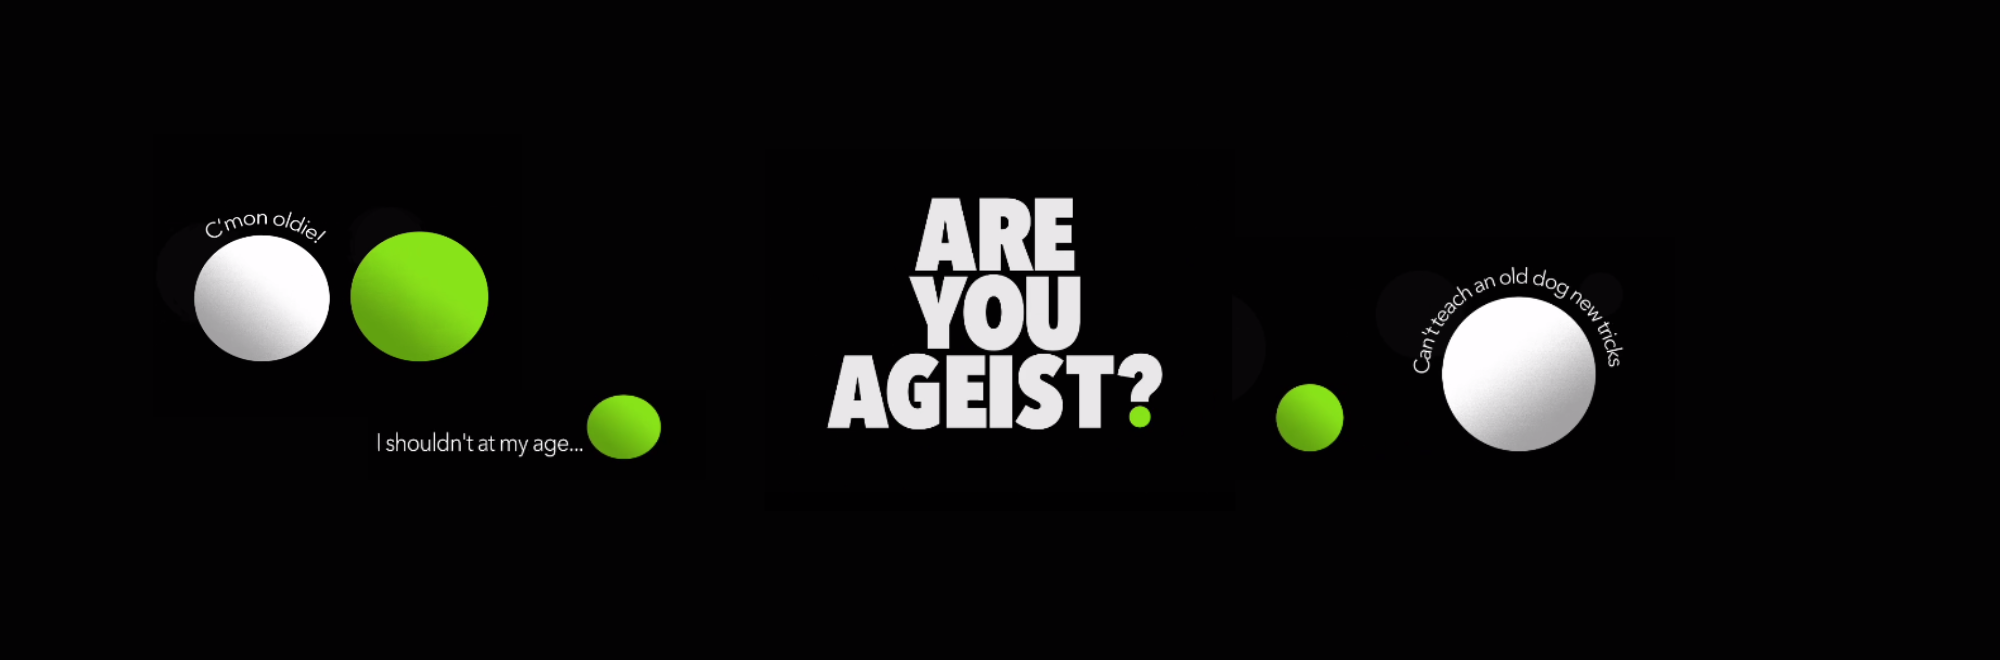 The Green Blob Revolution: Are you ageist?